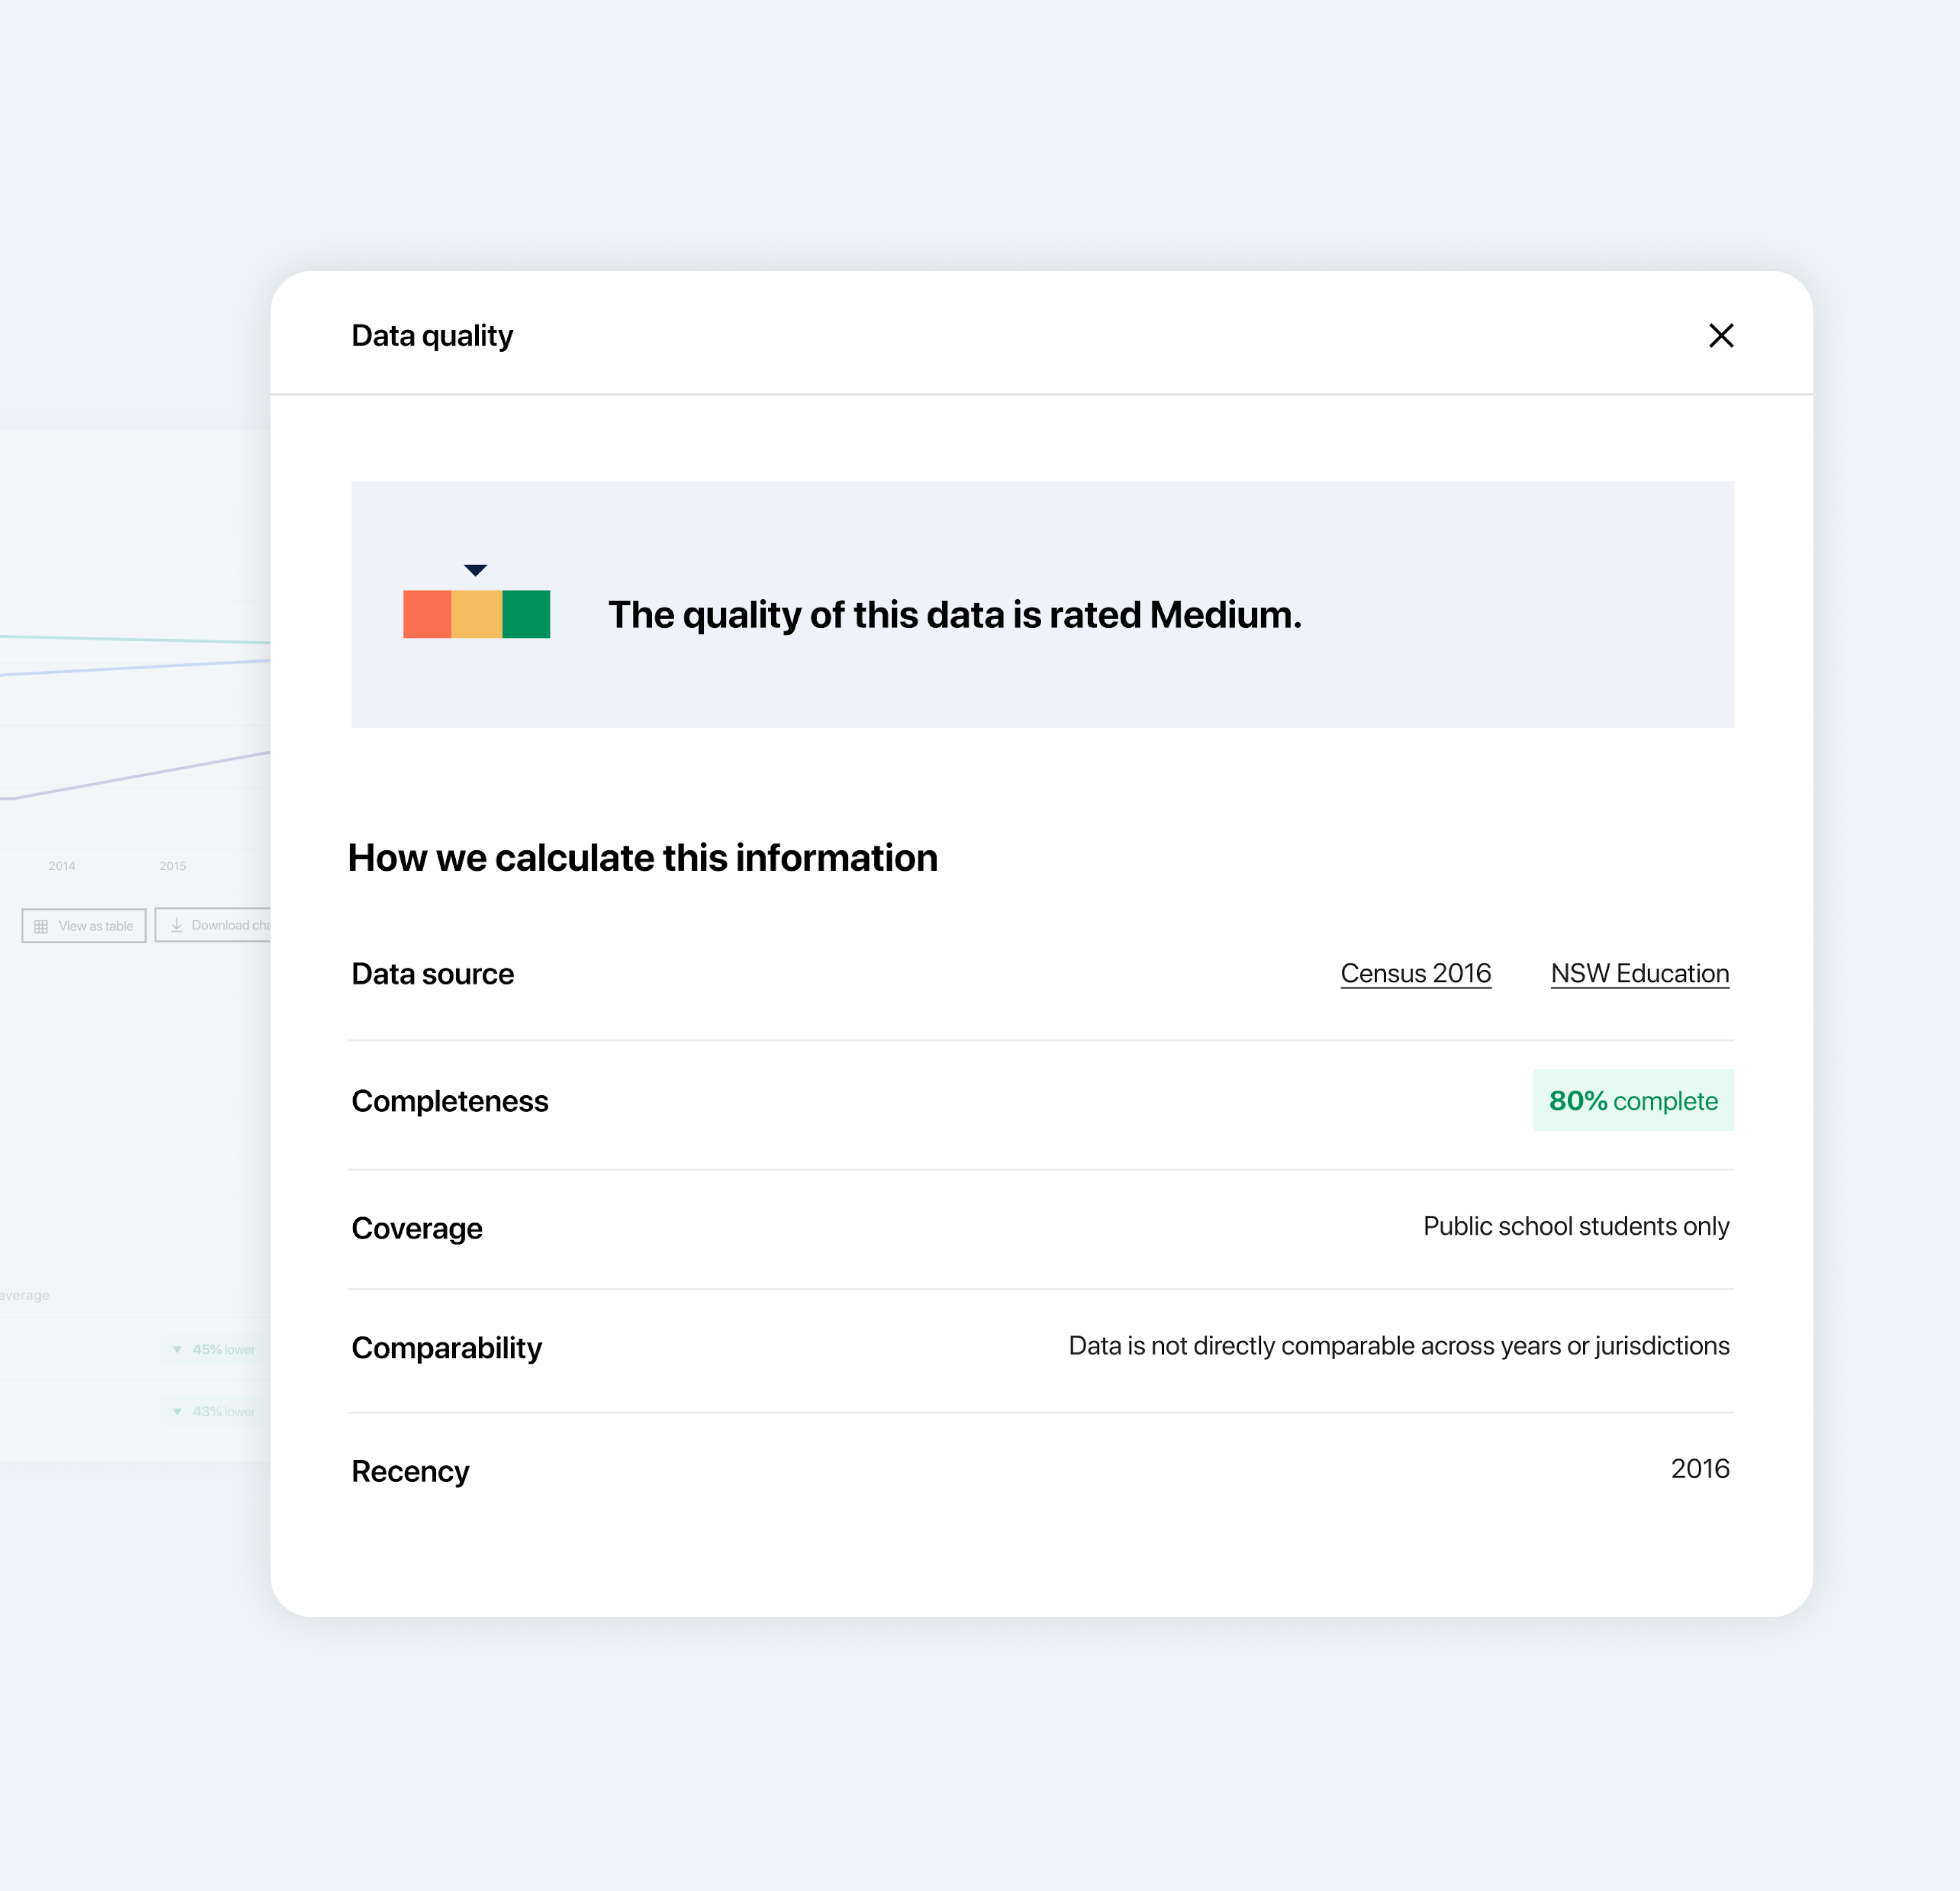 An image of a data quality modal from the prototype